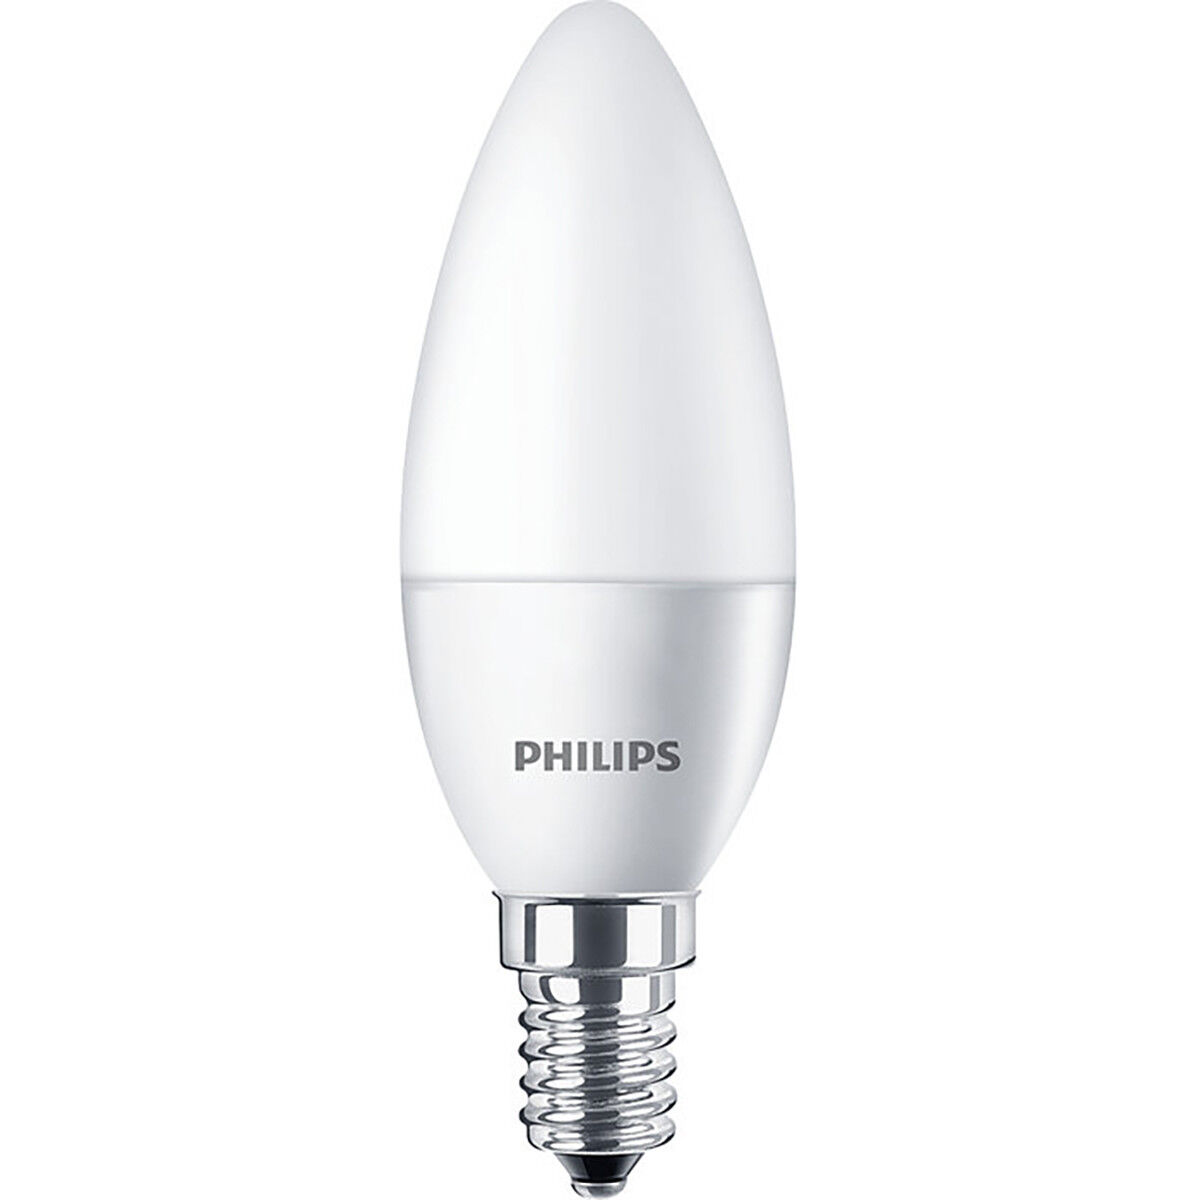 PHILIPS - LED Lamp - CorePro Candle 827 B35 FR - E14 Fitting - 5.5W - Warm Wit 2700K   Vervangt 40W